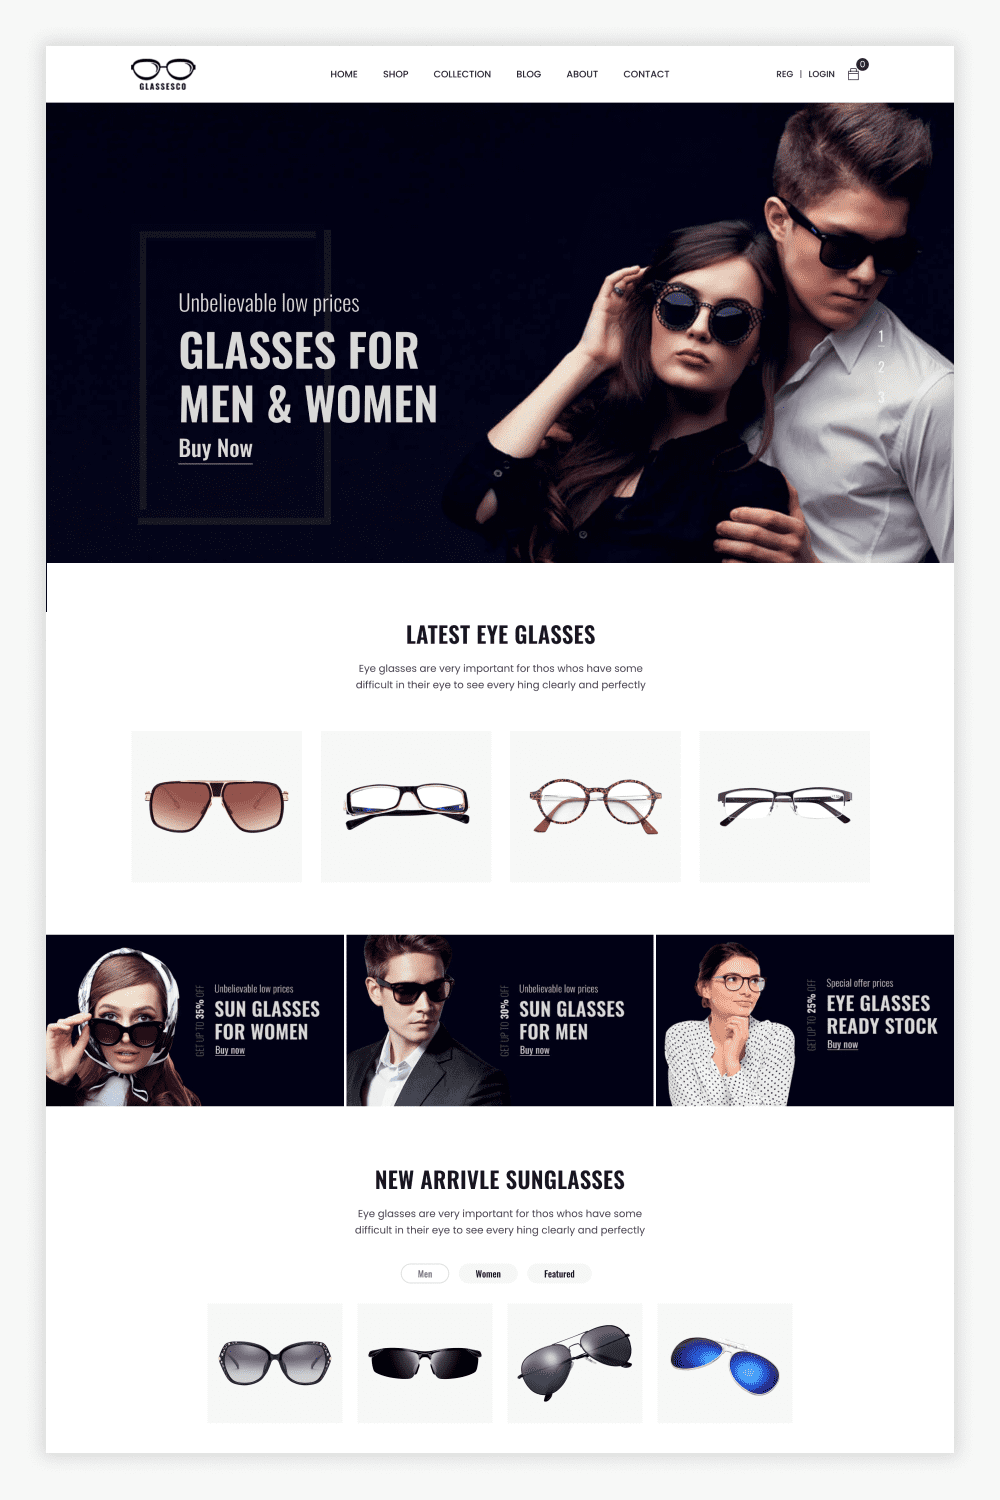 Home page of an online store of bright sunglasses with photos of men and women.